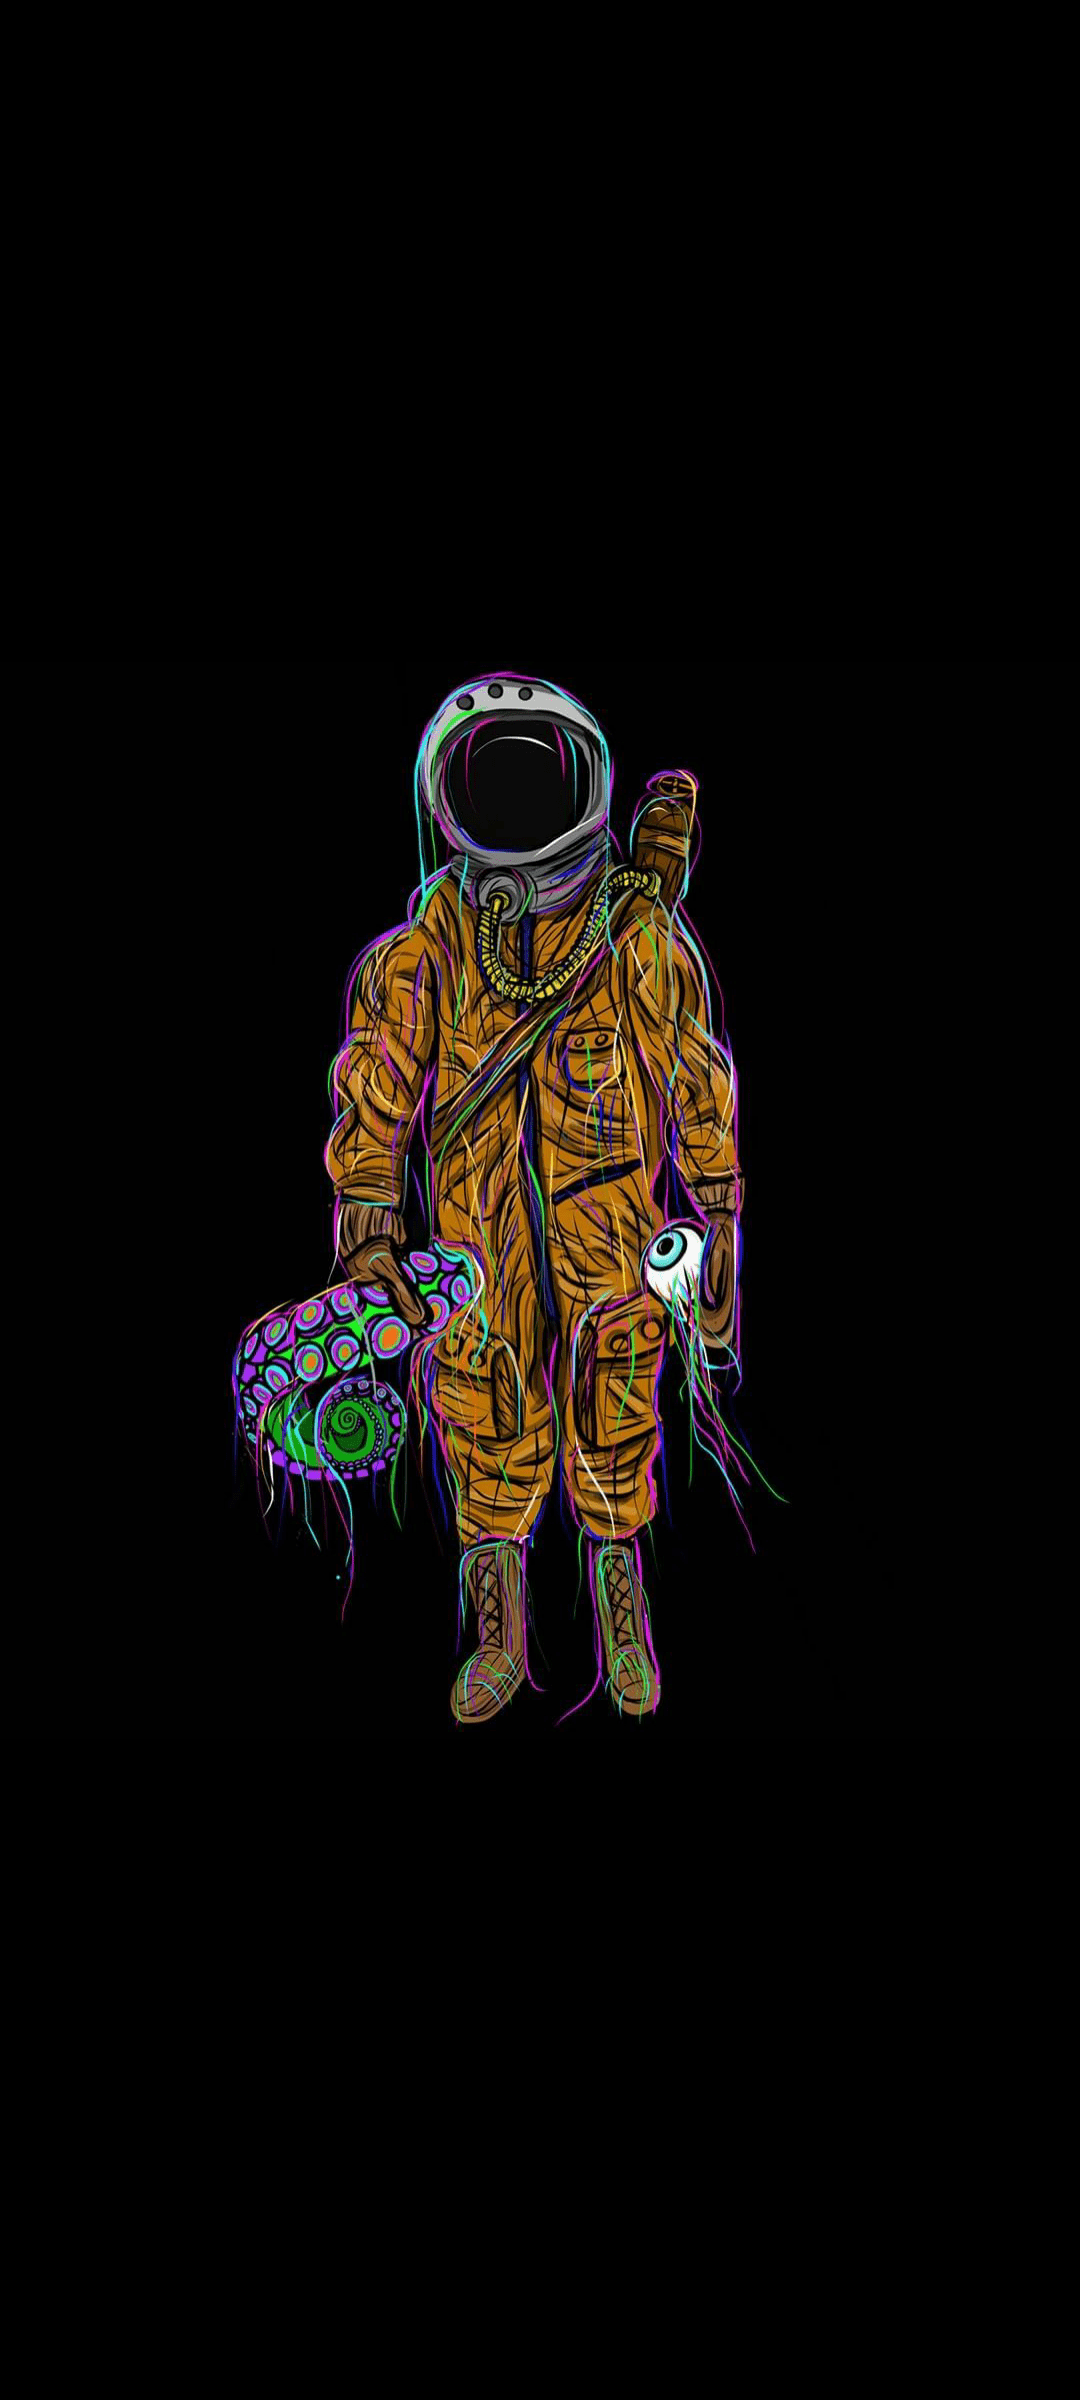 Astronaut Amoled Wallpapers - Top Free Astronaut Amoled Backgrounds ...